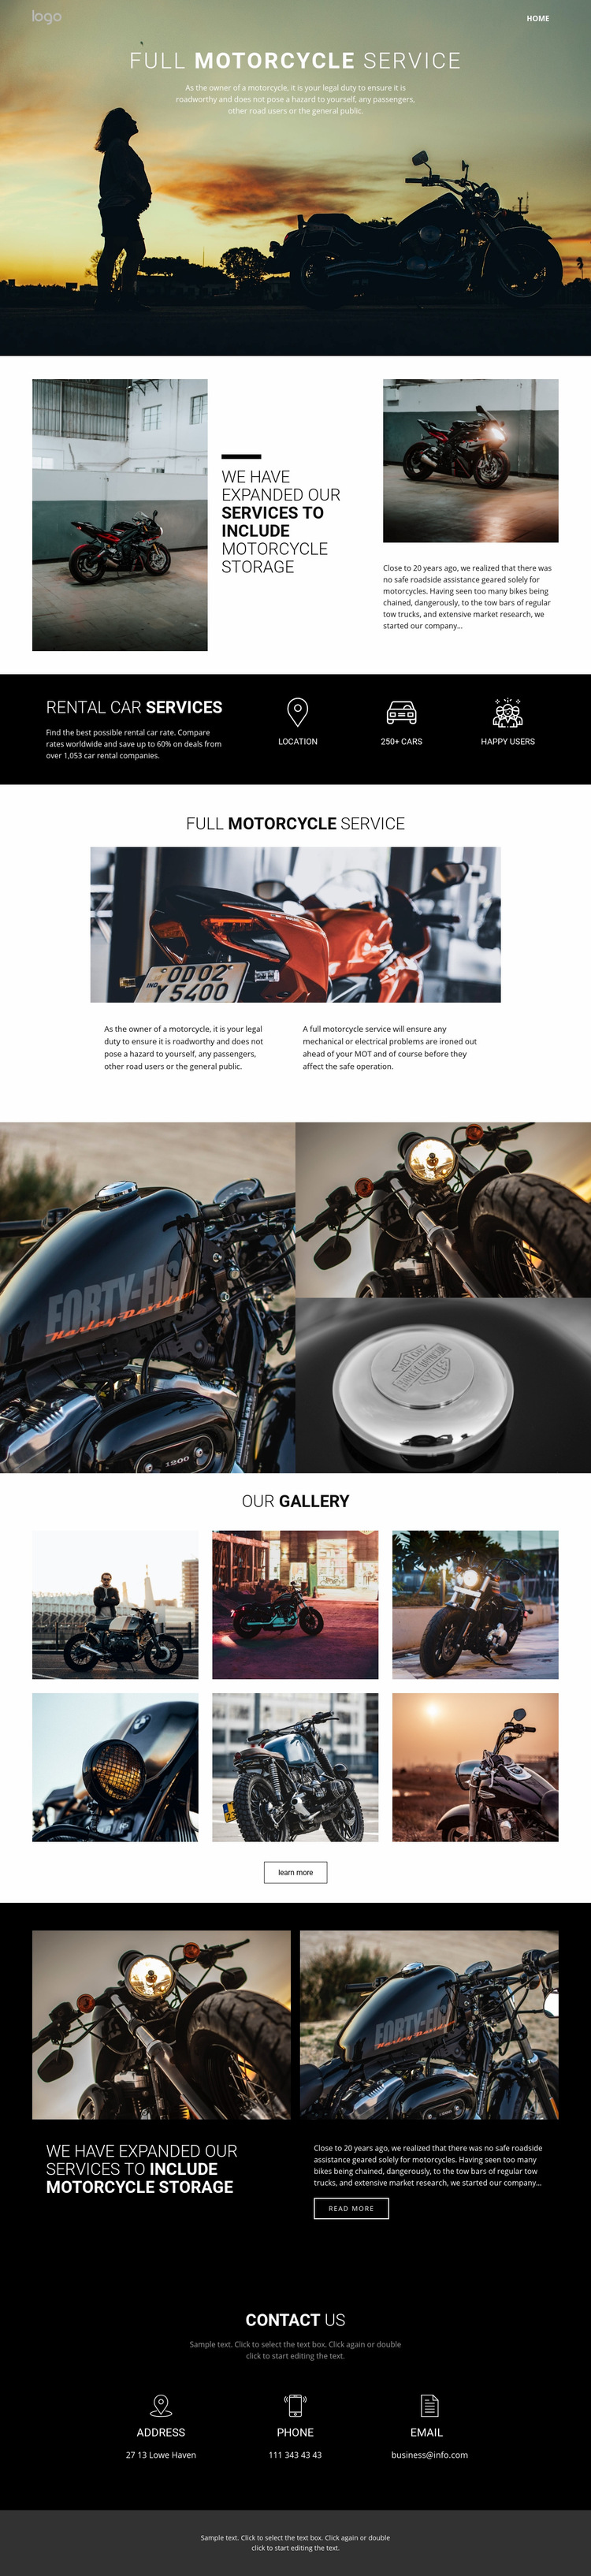 Caring for cycles and cars Web Page Design